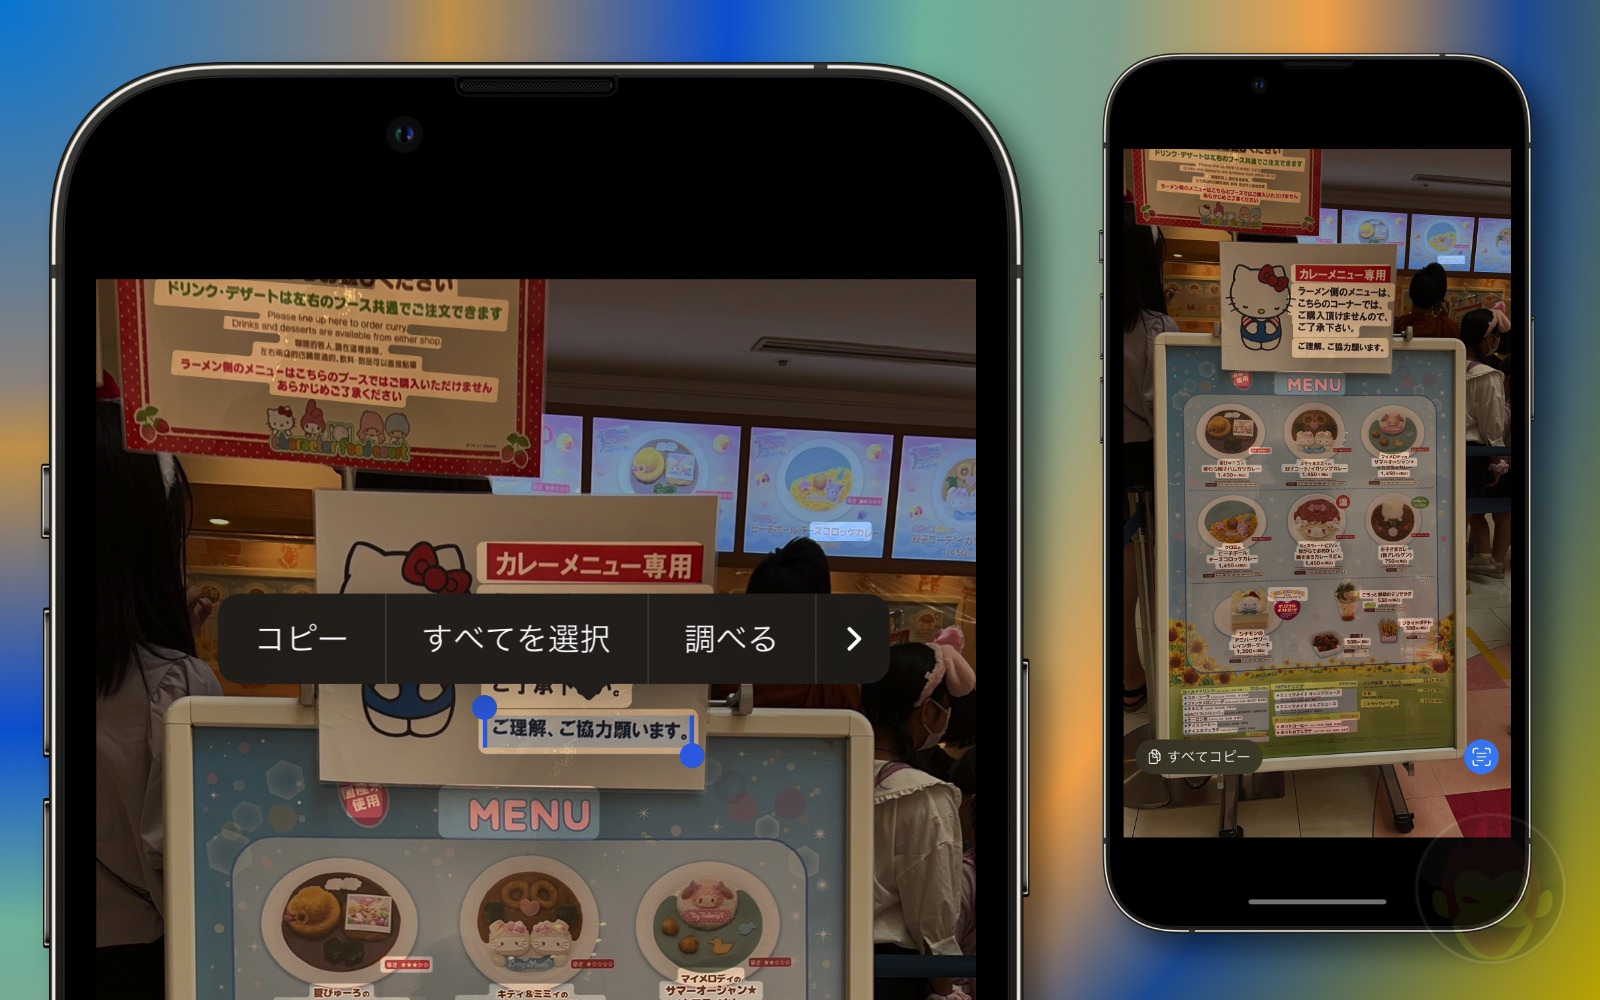 Ios16 image to text feature in japanese